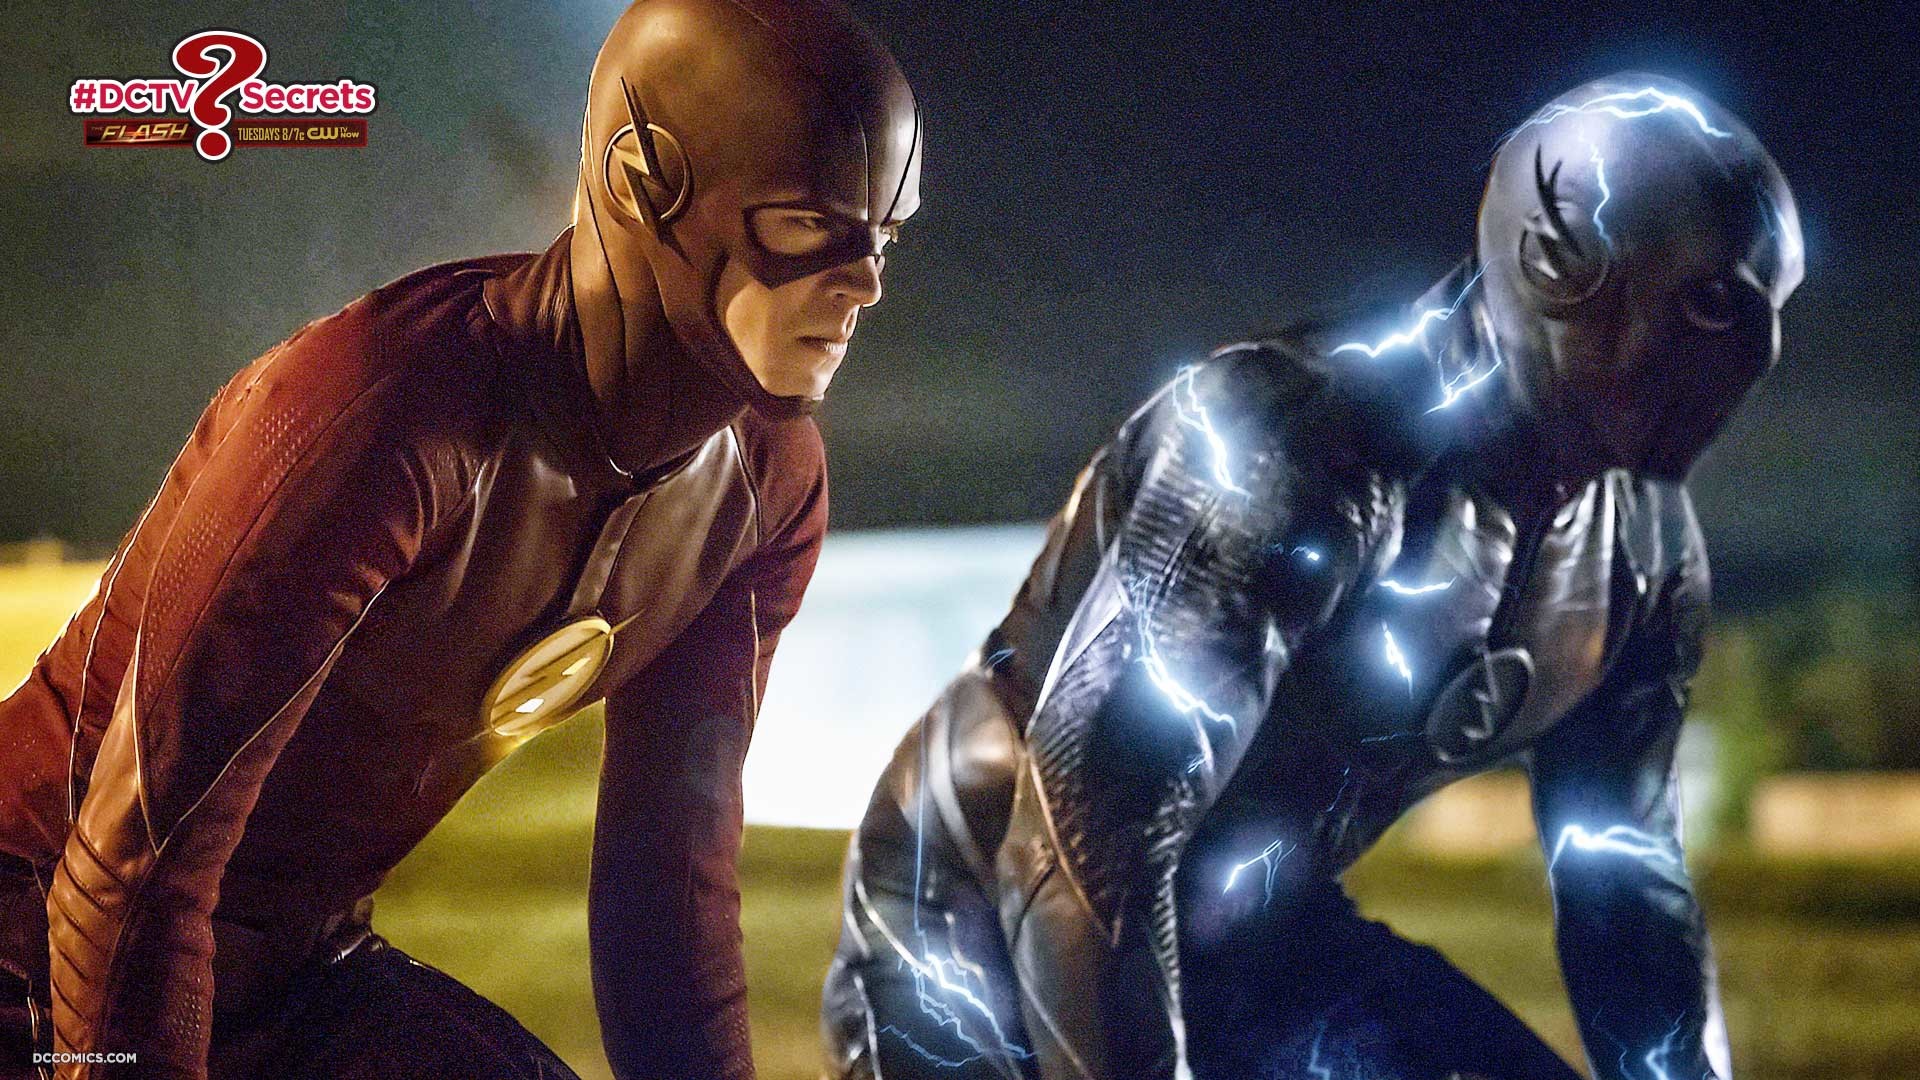 1920x1080 The Flash HD Images 4 #TheFlashHDImages #TheFlash #tvseries #wallpapers